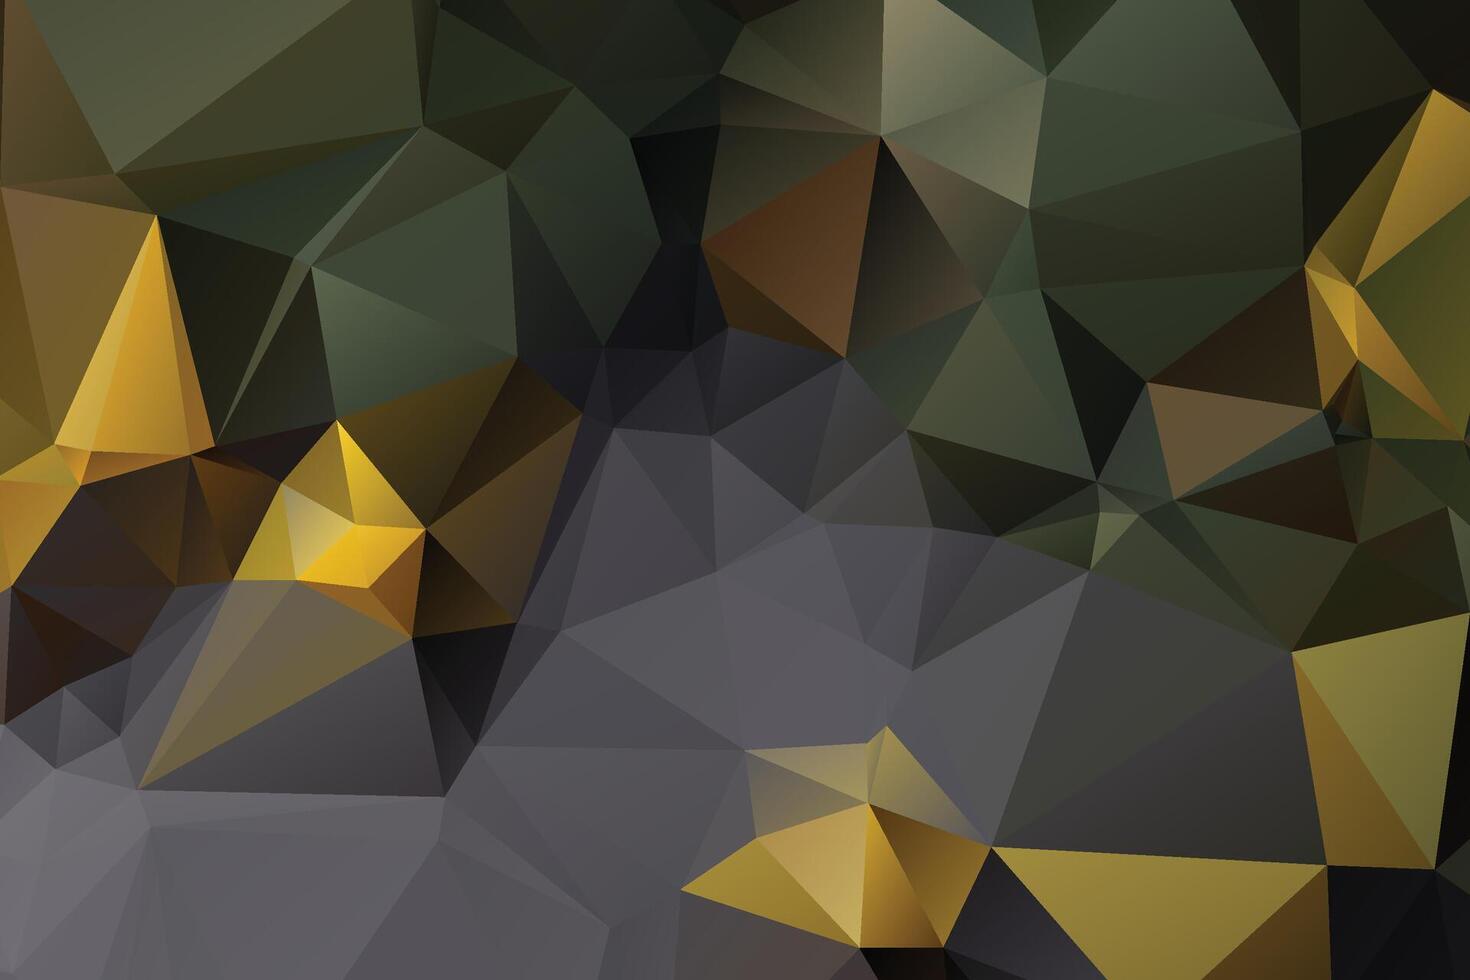 low poly design vector